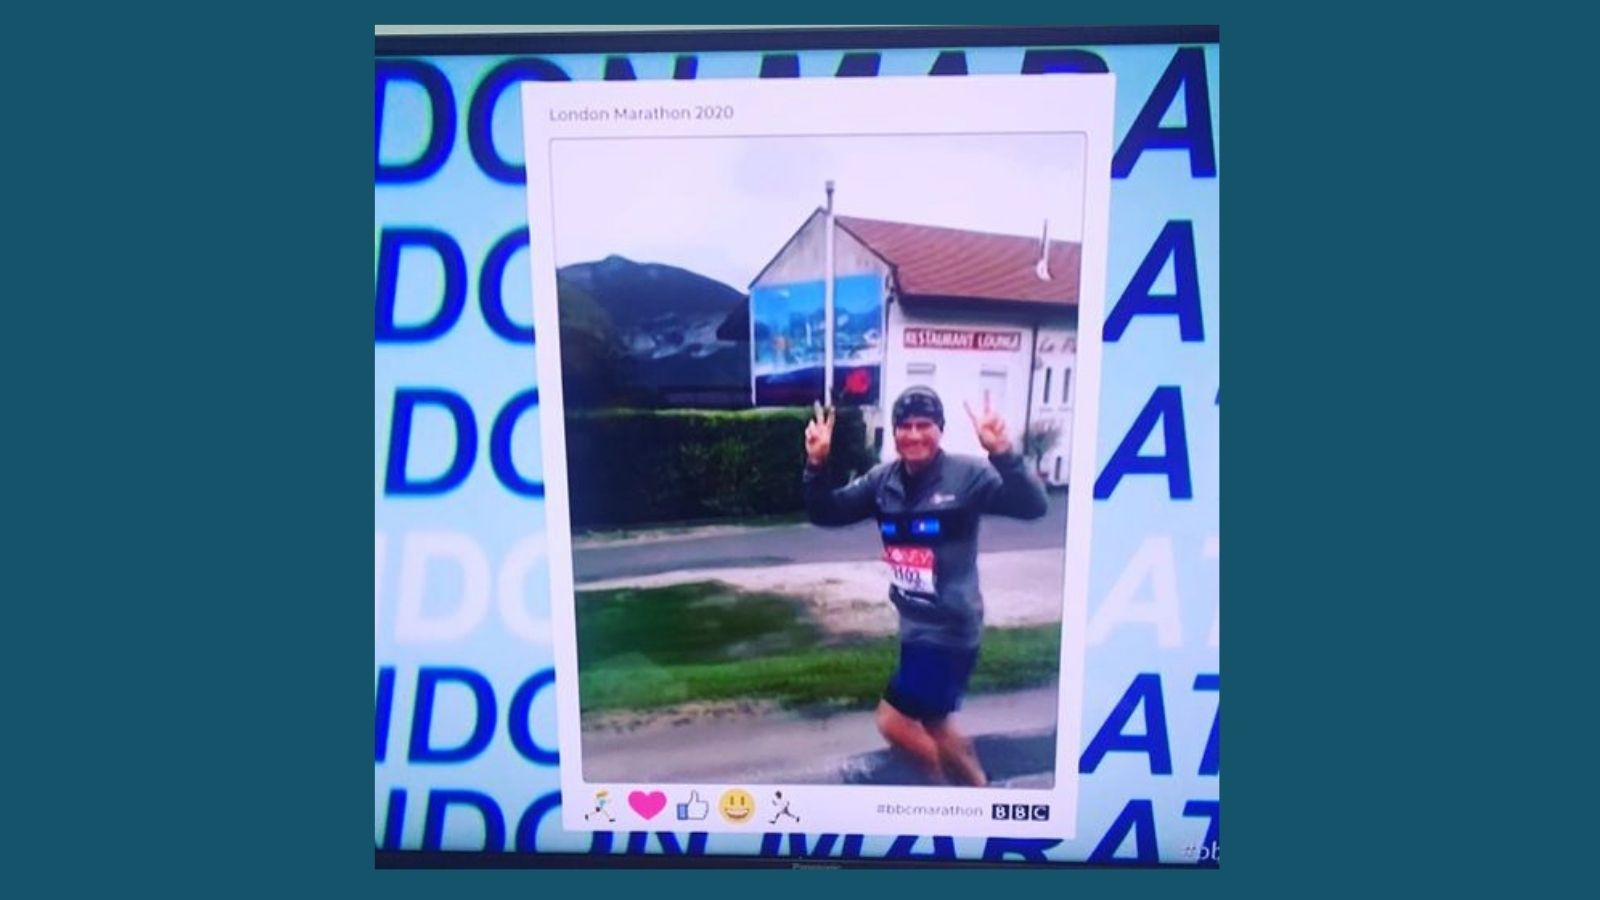 picture of Mark as seen on BBC coverage, jogging make a peace sign and smiling